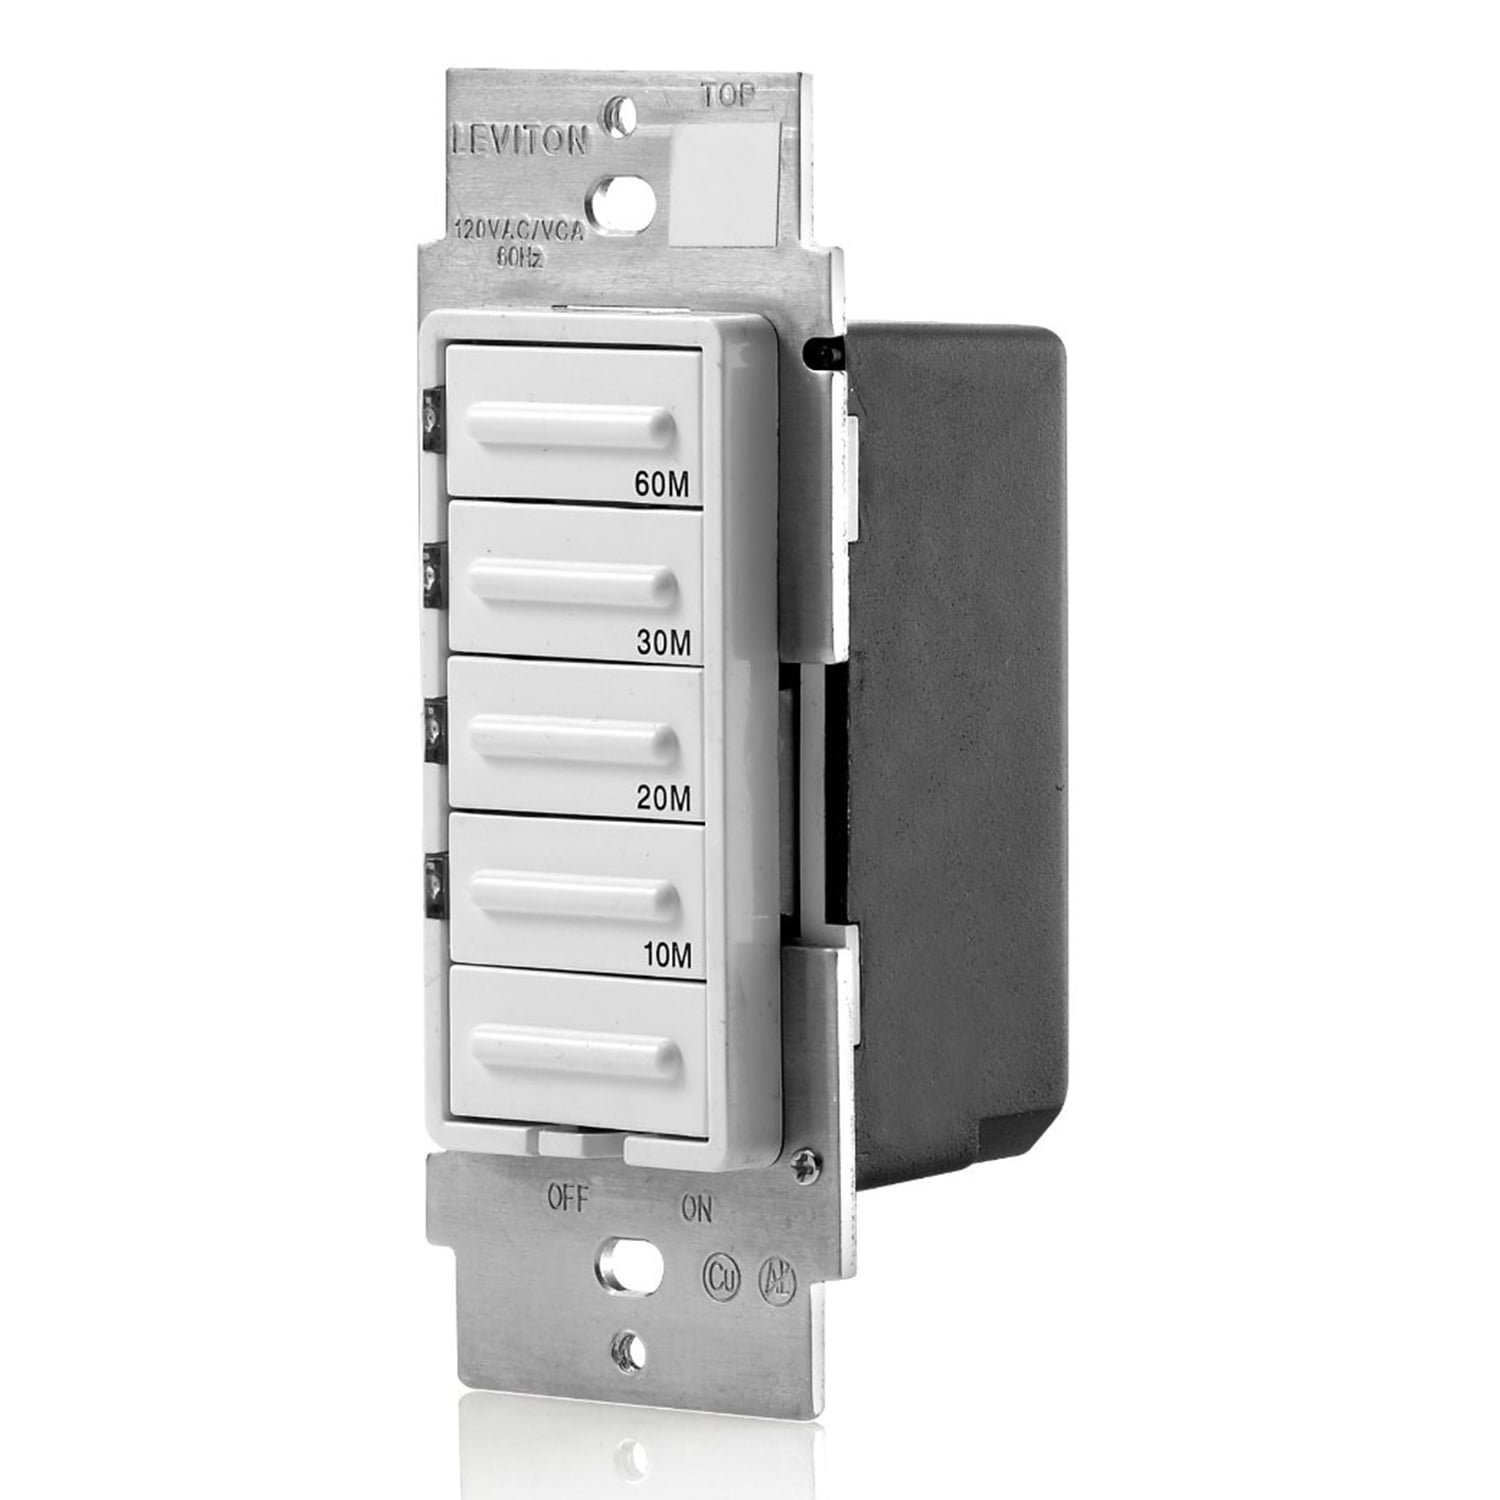 Ivory Leviton 001-LTB30-1LZ 30 Minute White And Light Almond Interchangeable Decora Electronic Timer Switch